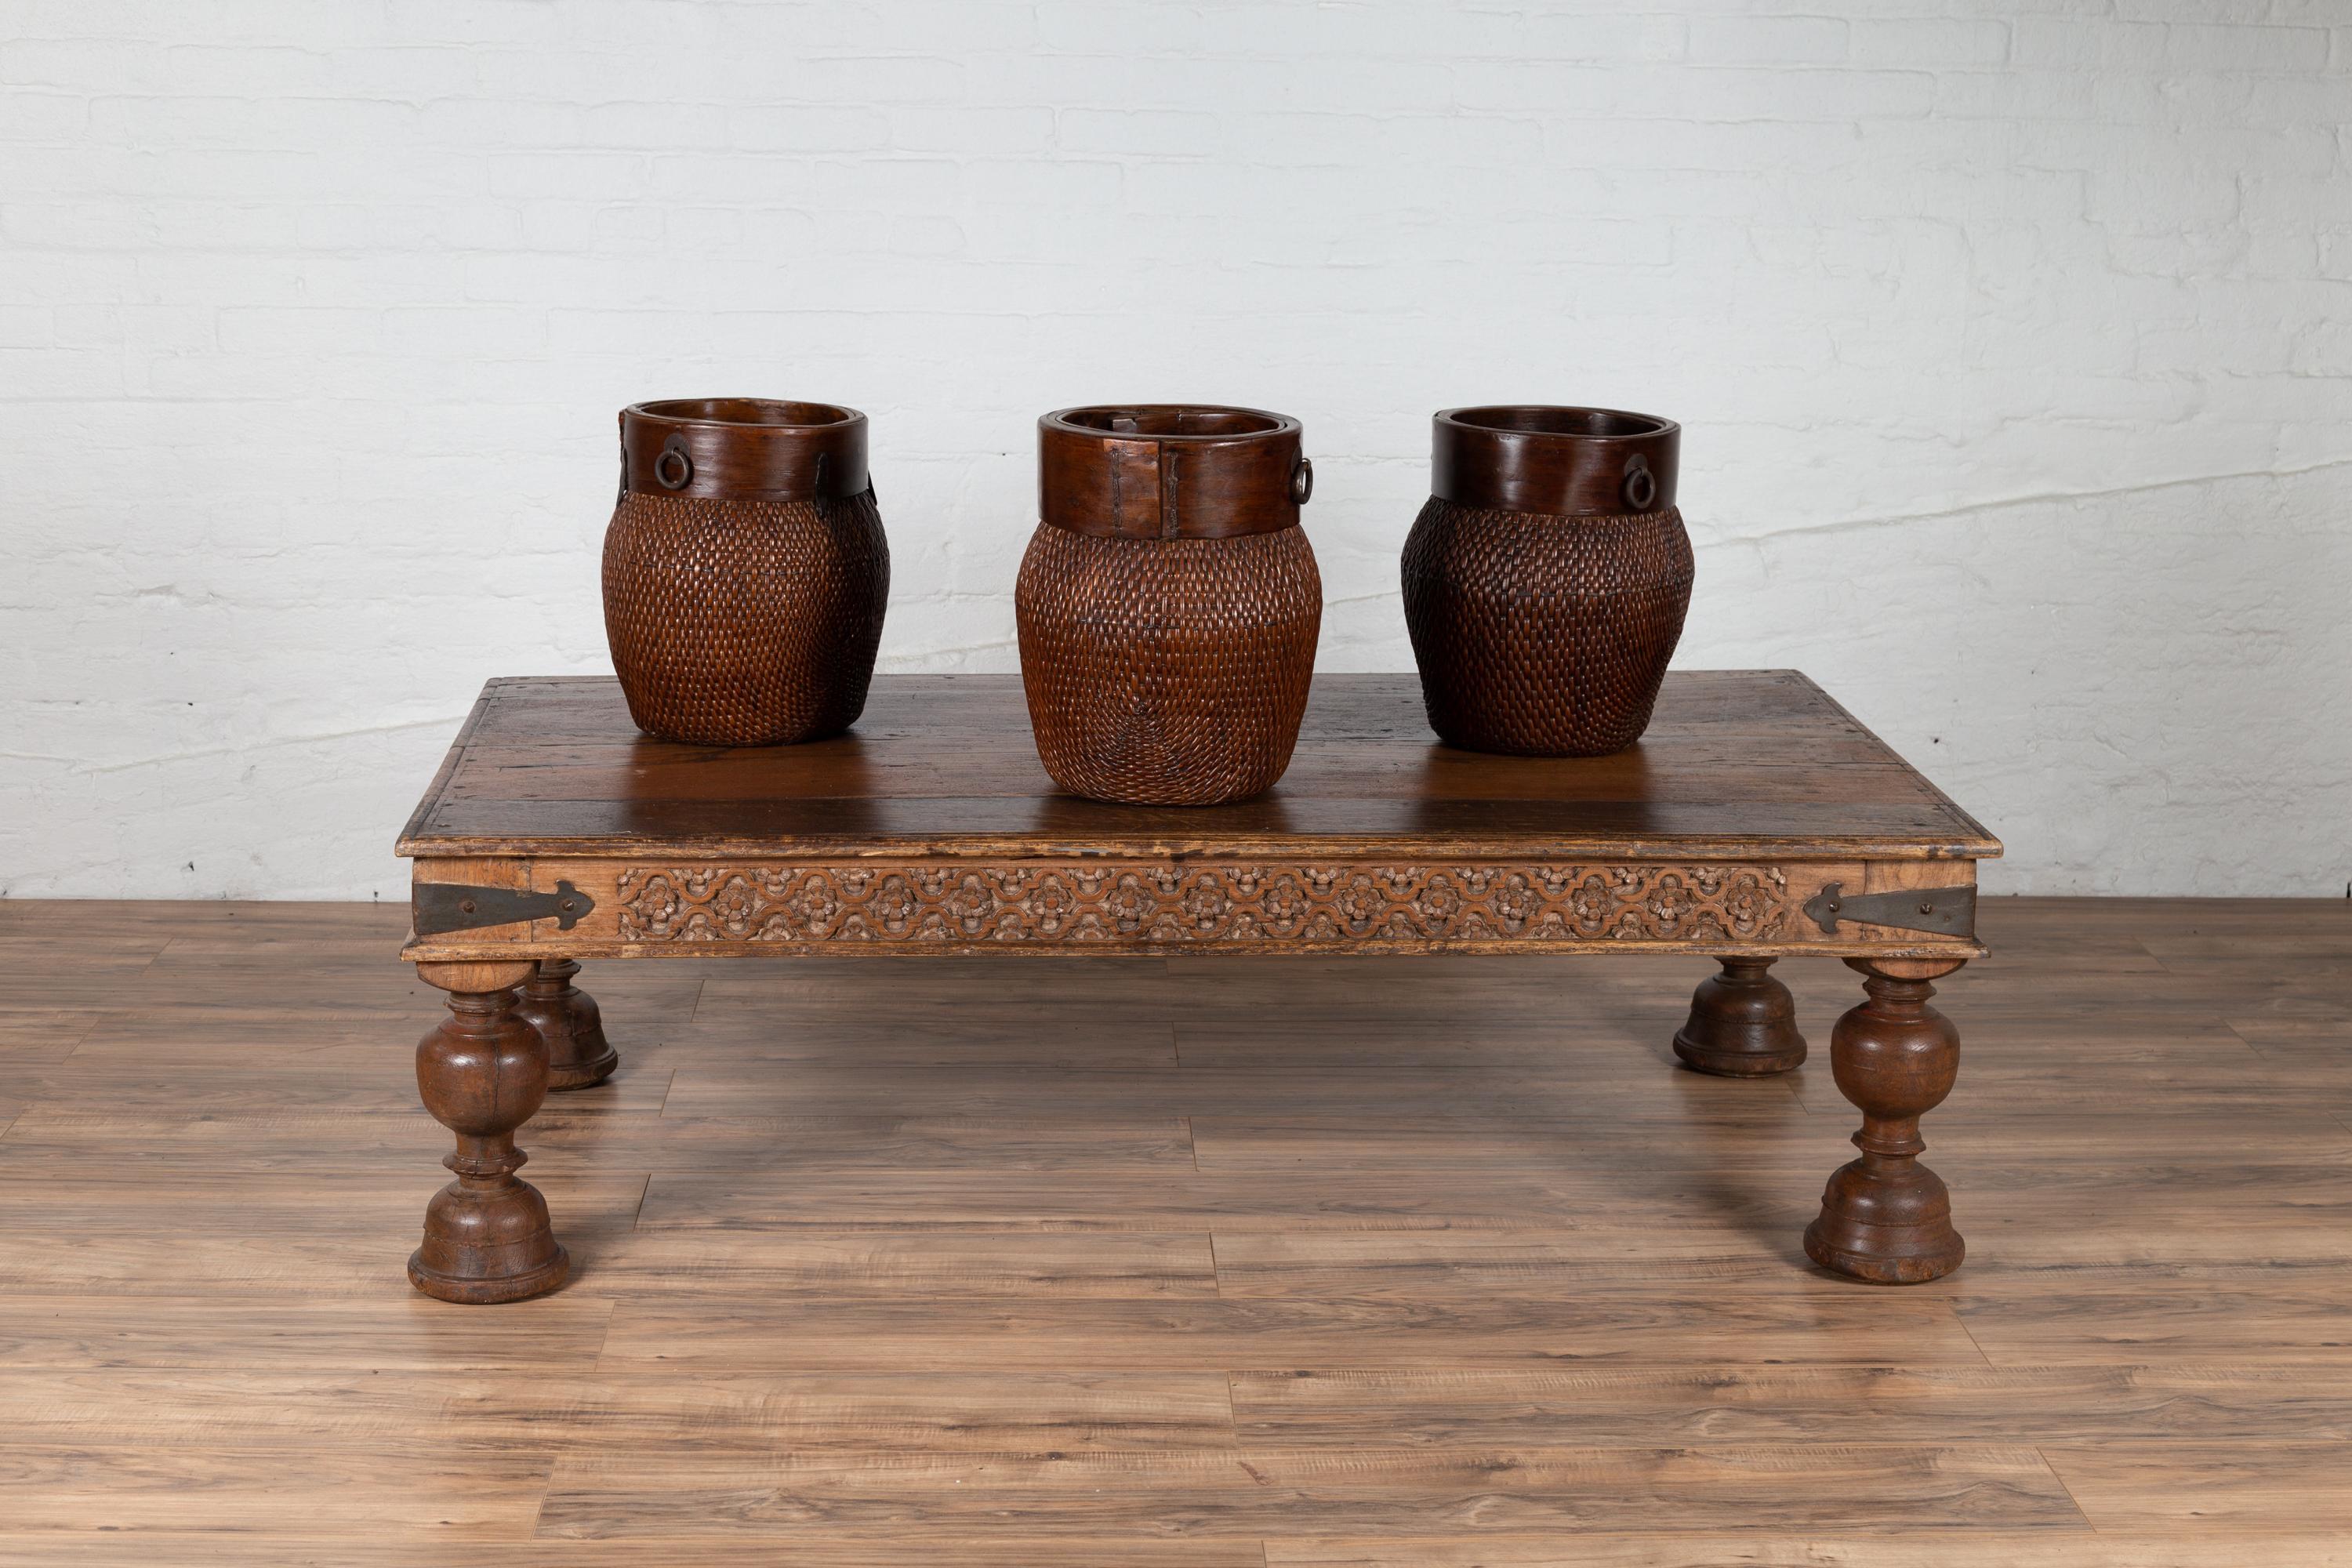 An antique Javanese teak wood long coffee table from the early 20th century, with hand carved apron and globe-inspired turned legs. Born on the island of Java, this exquisite coffee table features a rectangular top with nicely weathered patina,